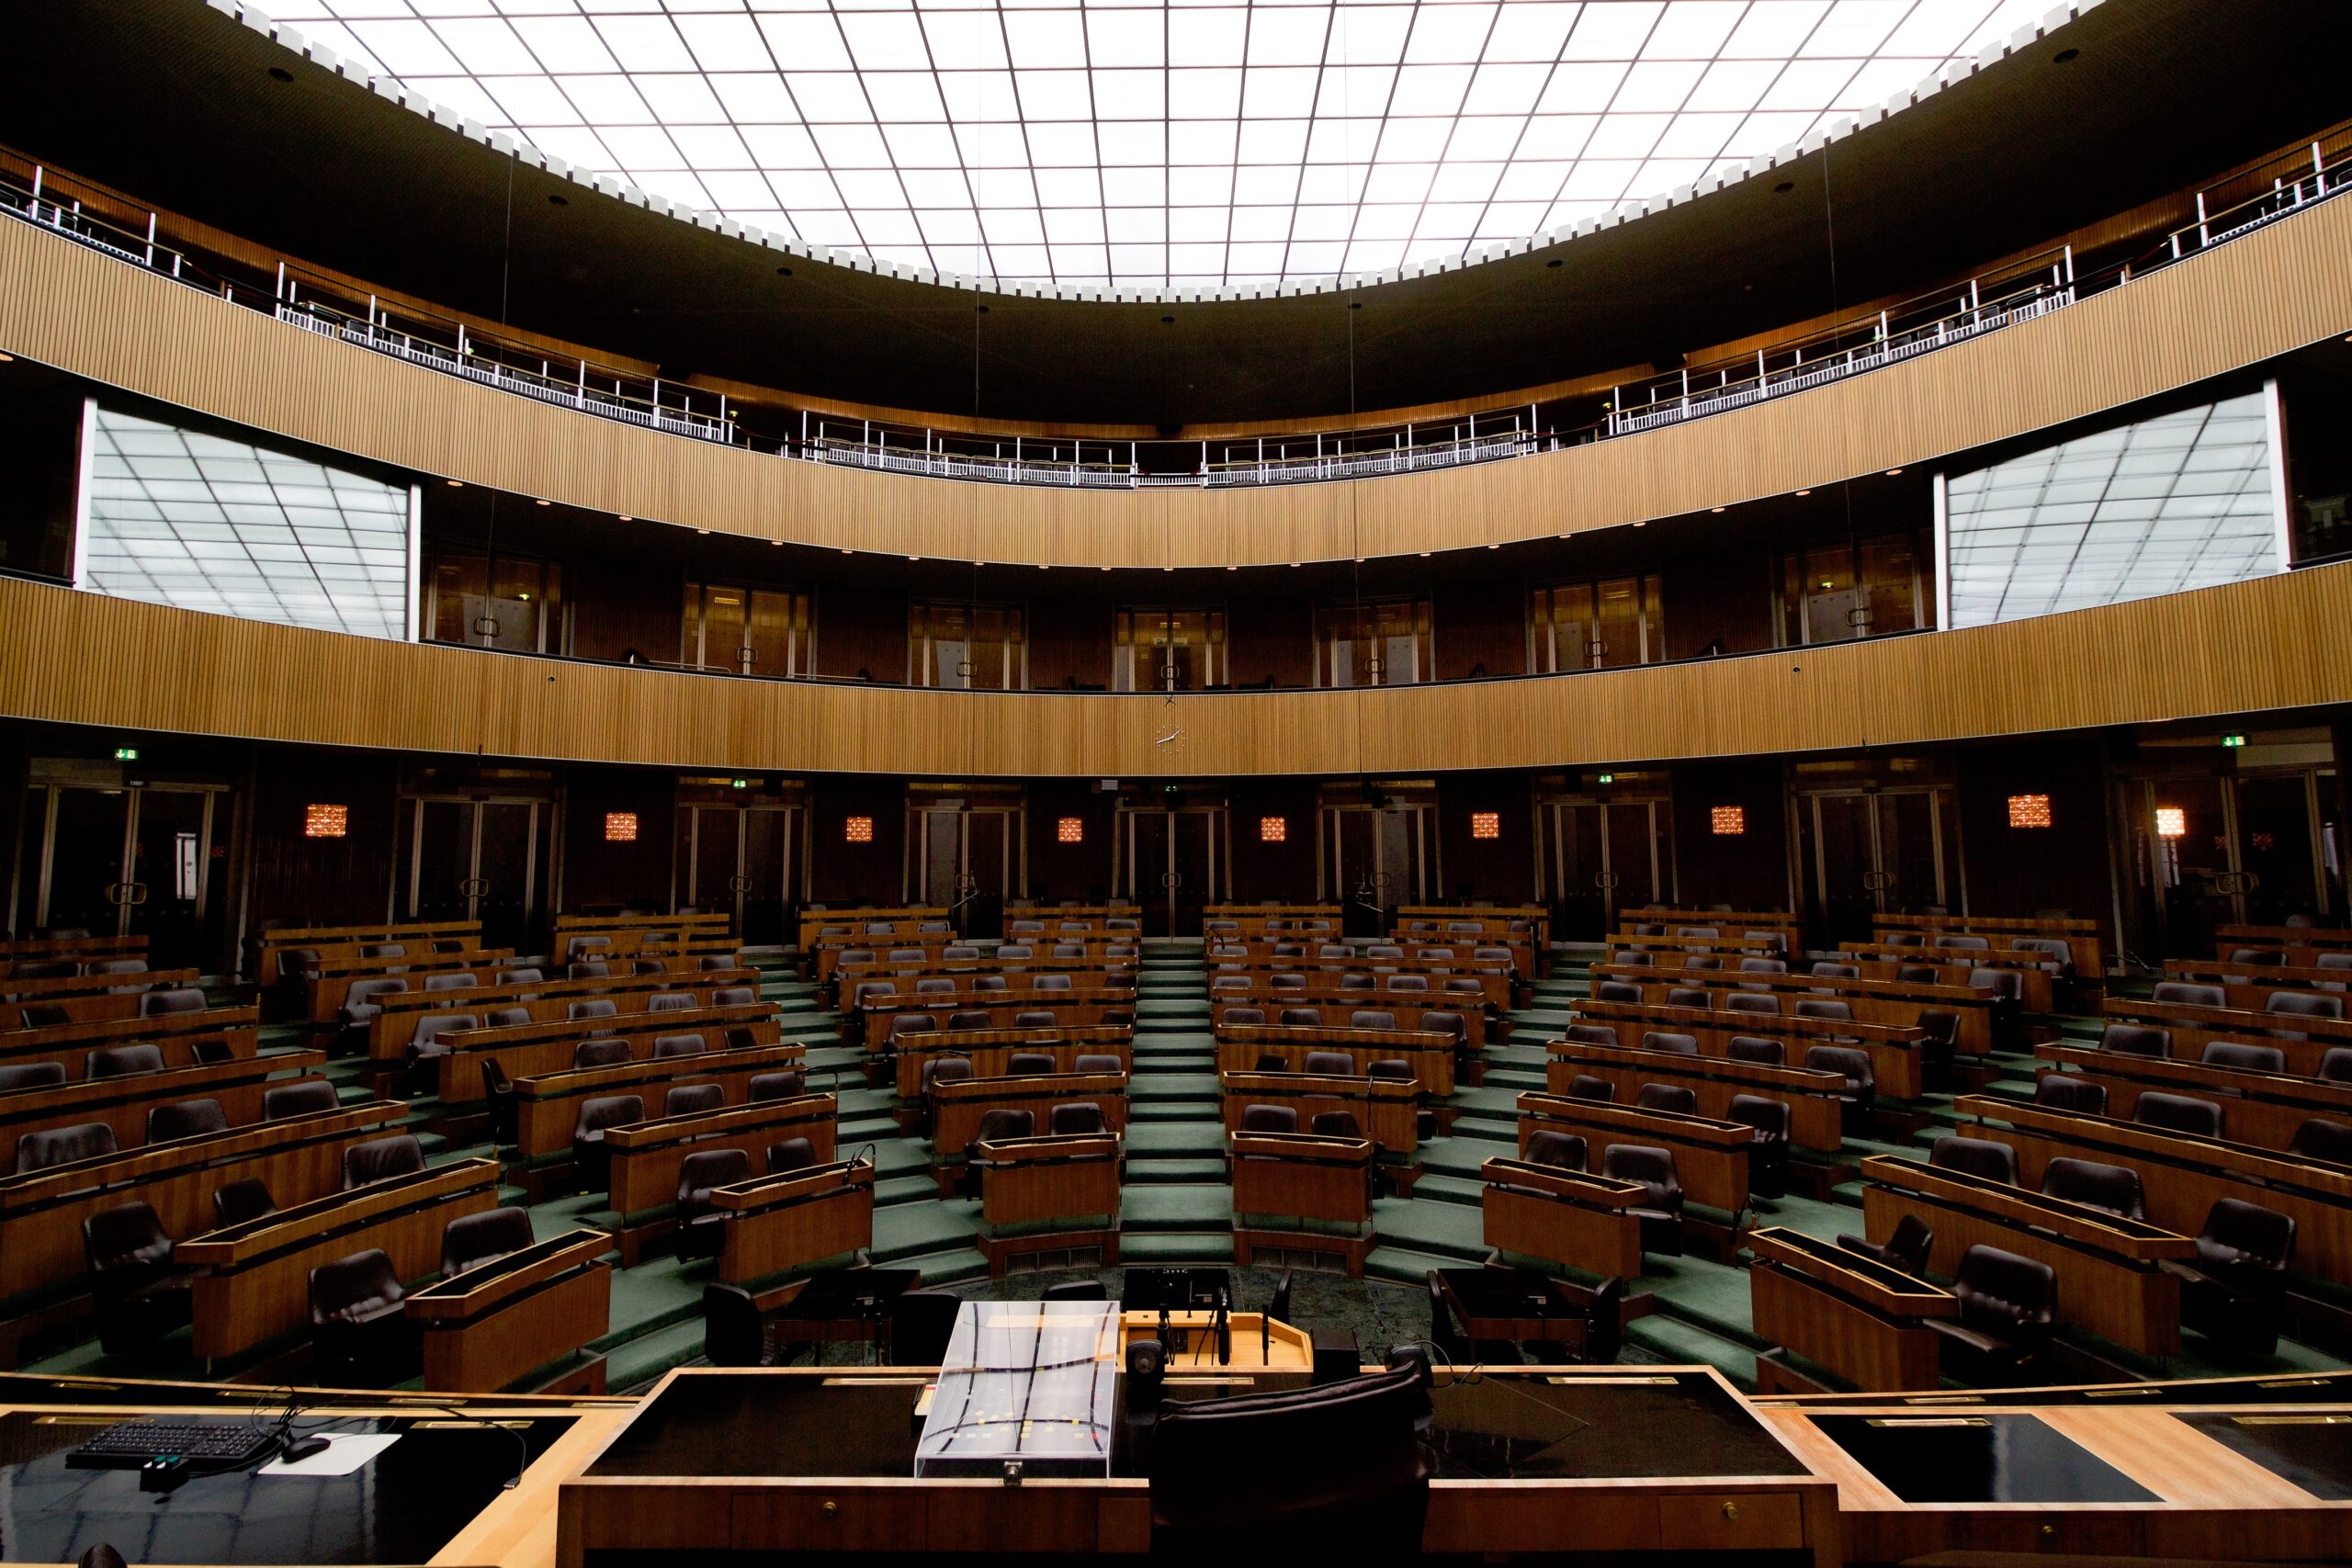 frederic koberl g25k43O8 wk unsplash scaled - Emergency and Loan Unions - act passed by the Sejm